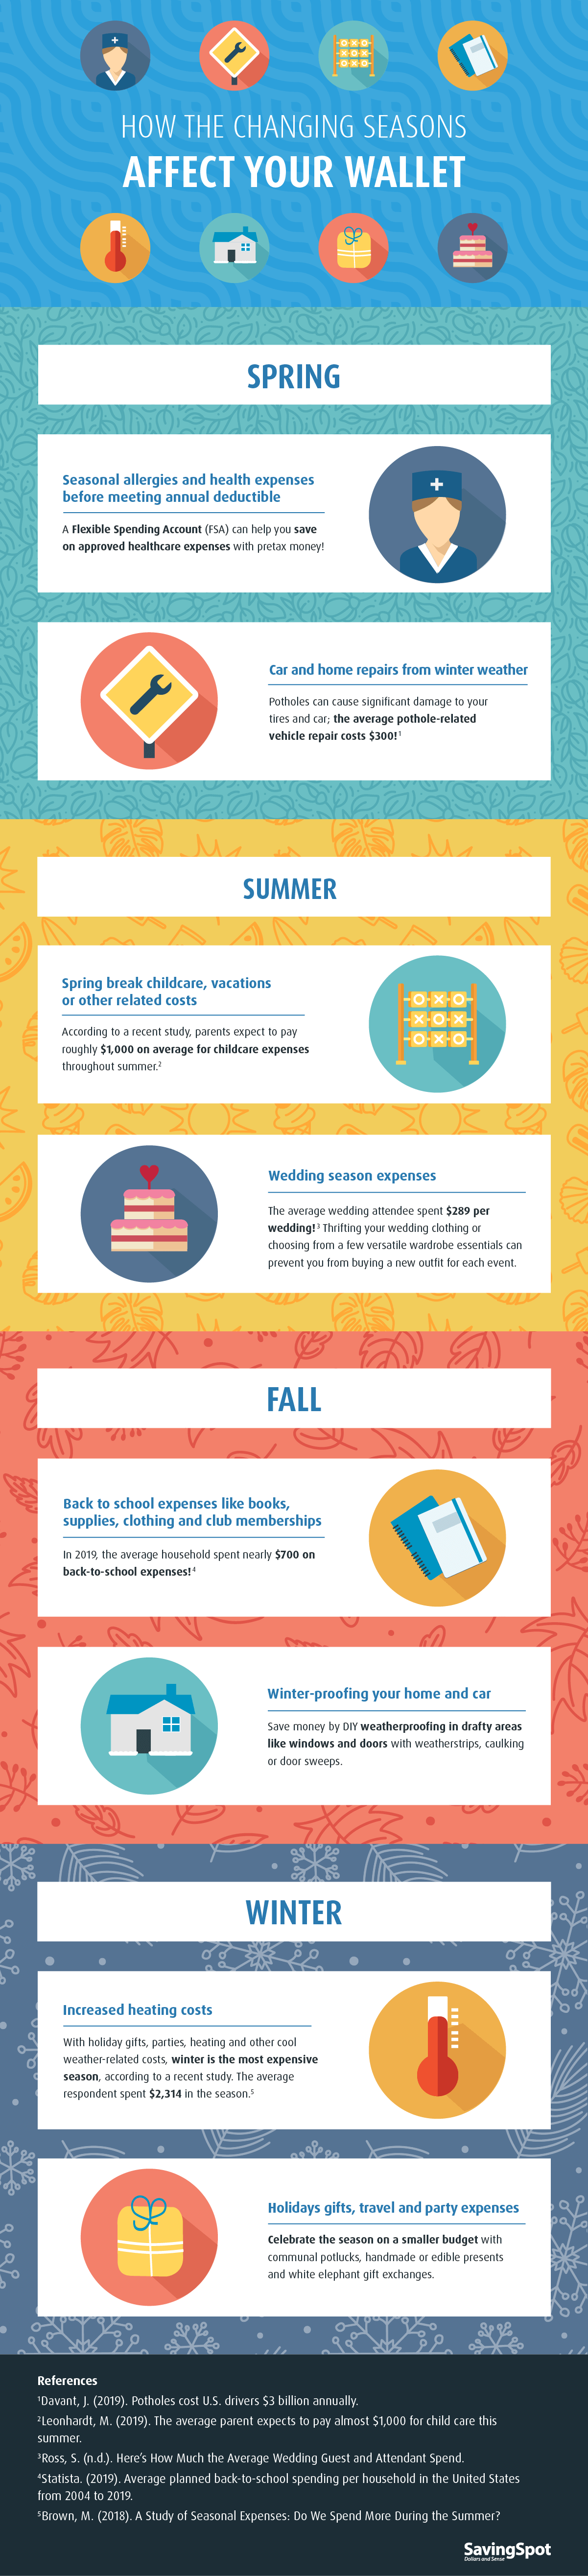 Infographic: How the Changing Seasons Affect Your Wallet